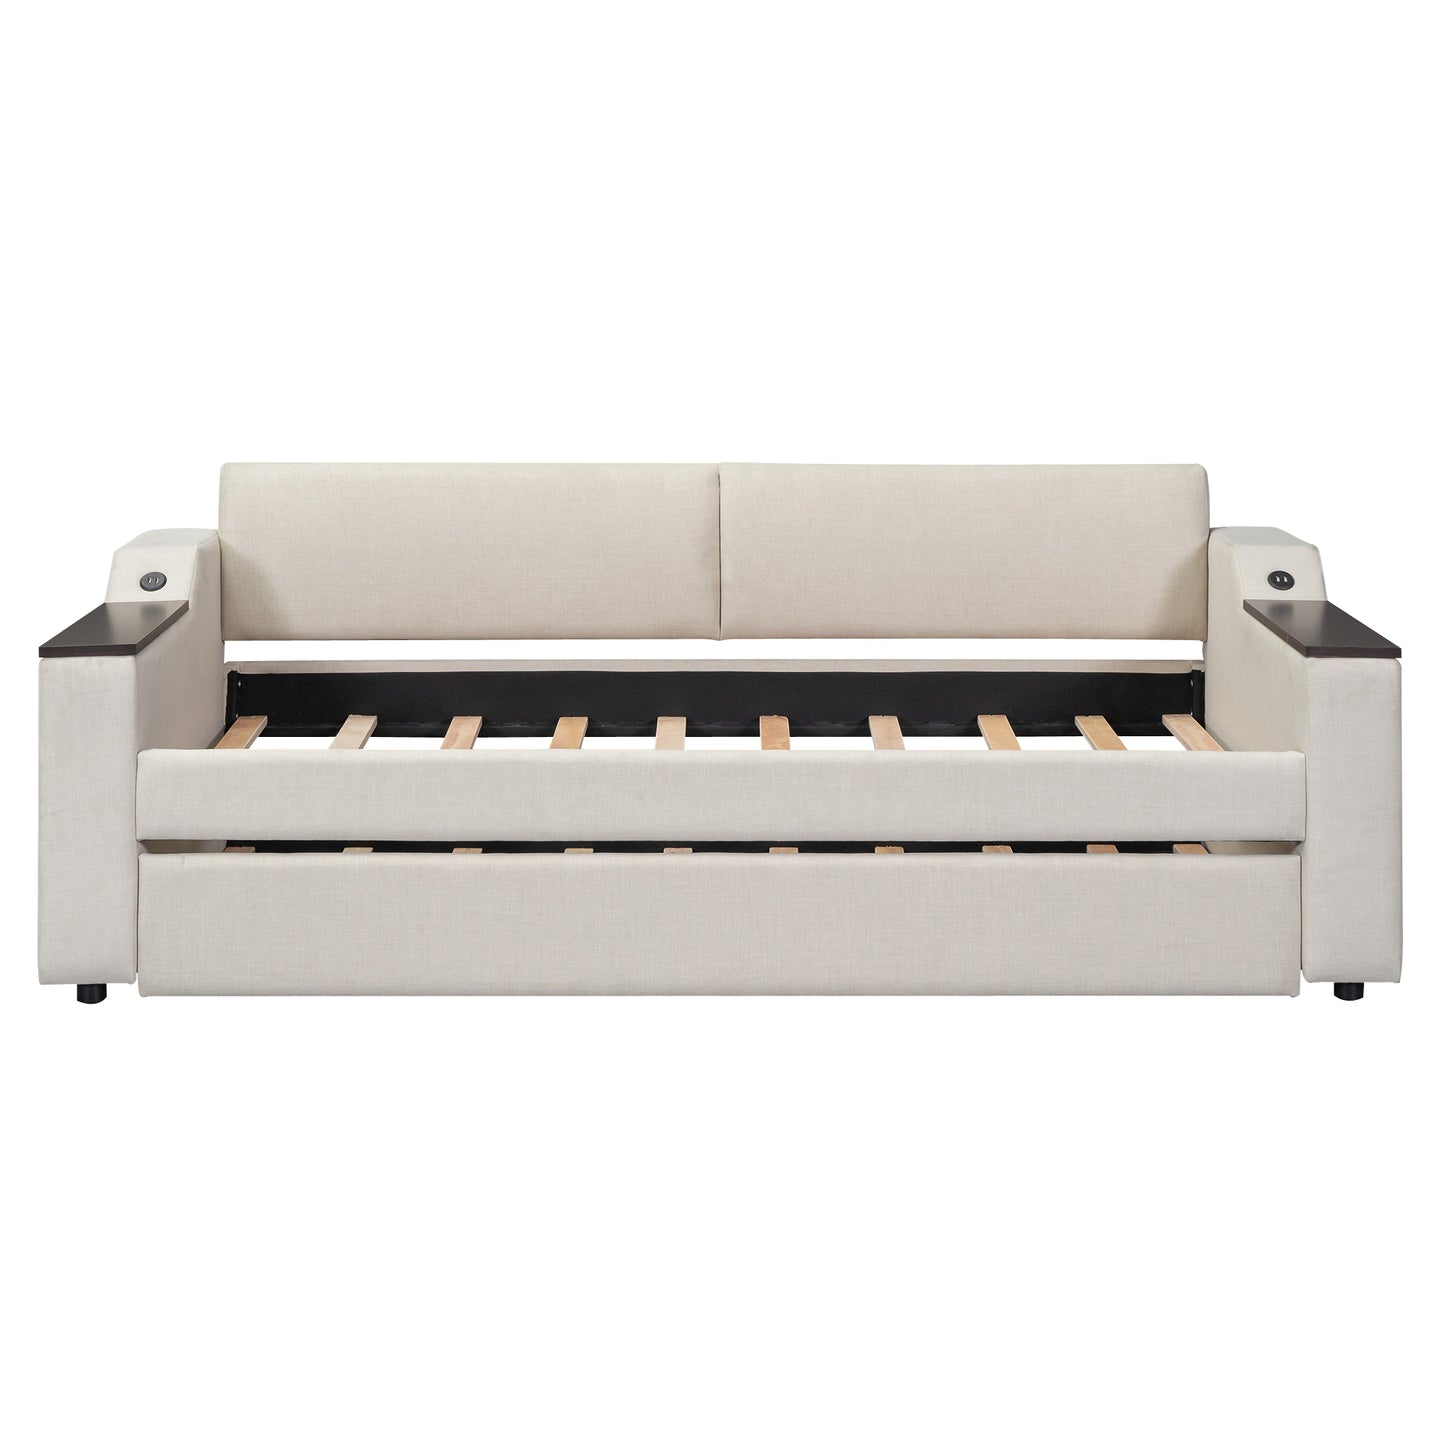 Twin Size Upholstery Daybed with Storage Arms, Trundle and USB Design, Beige